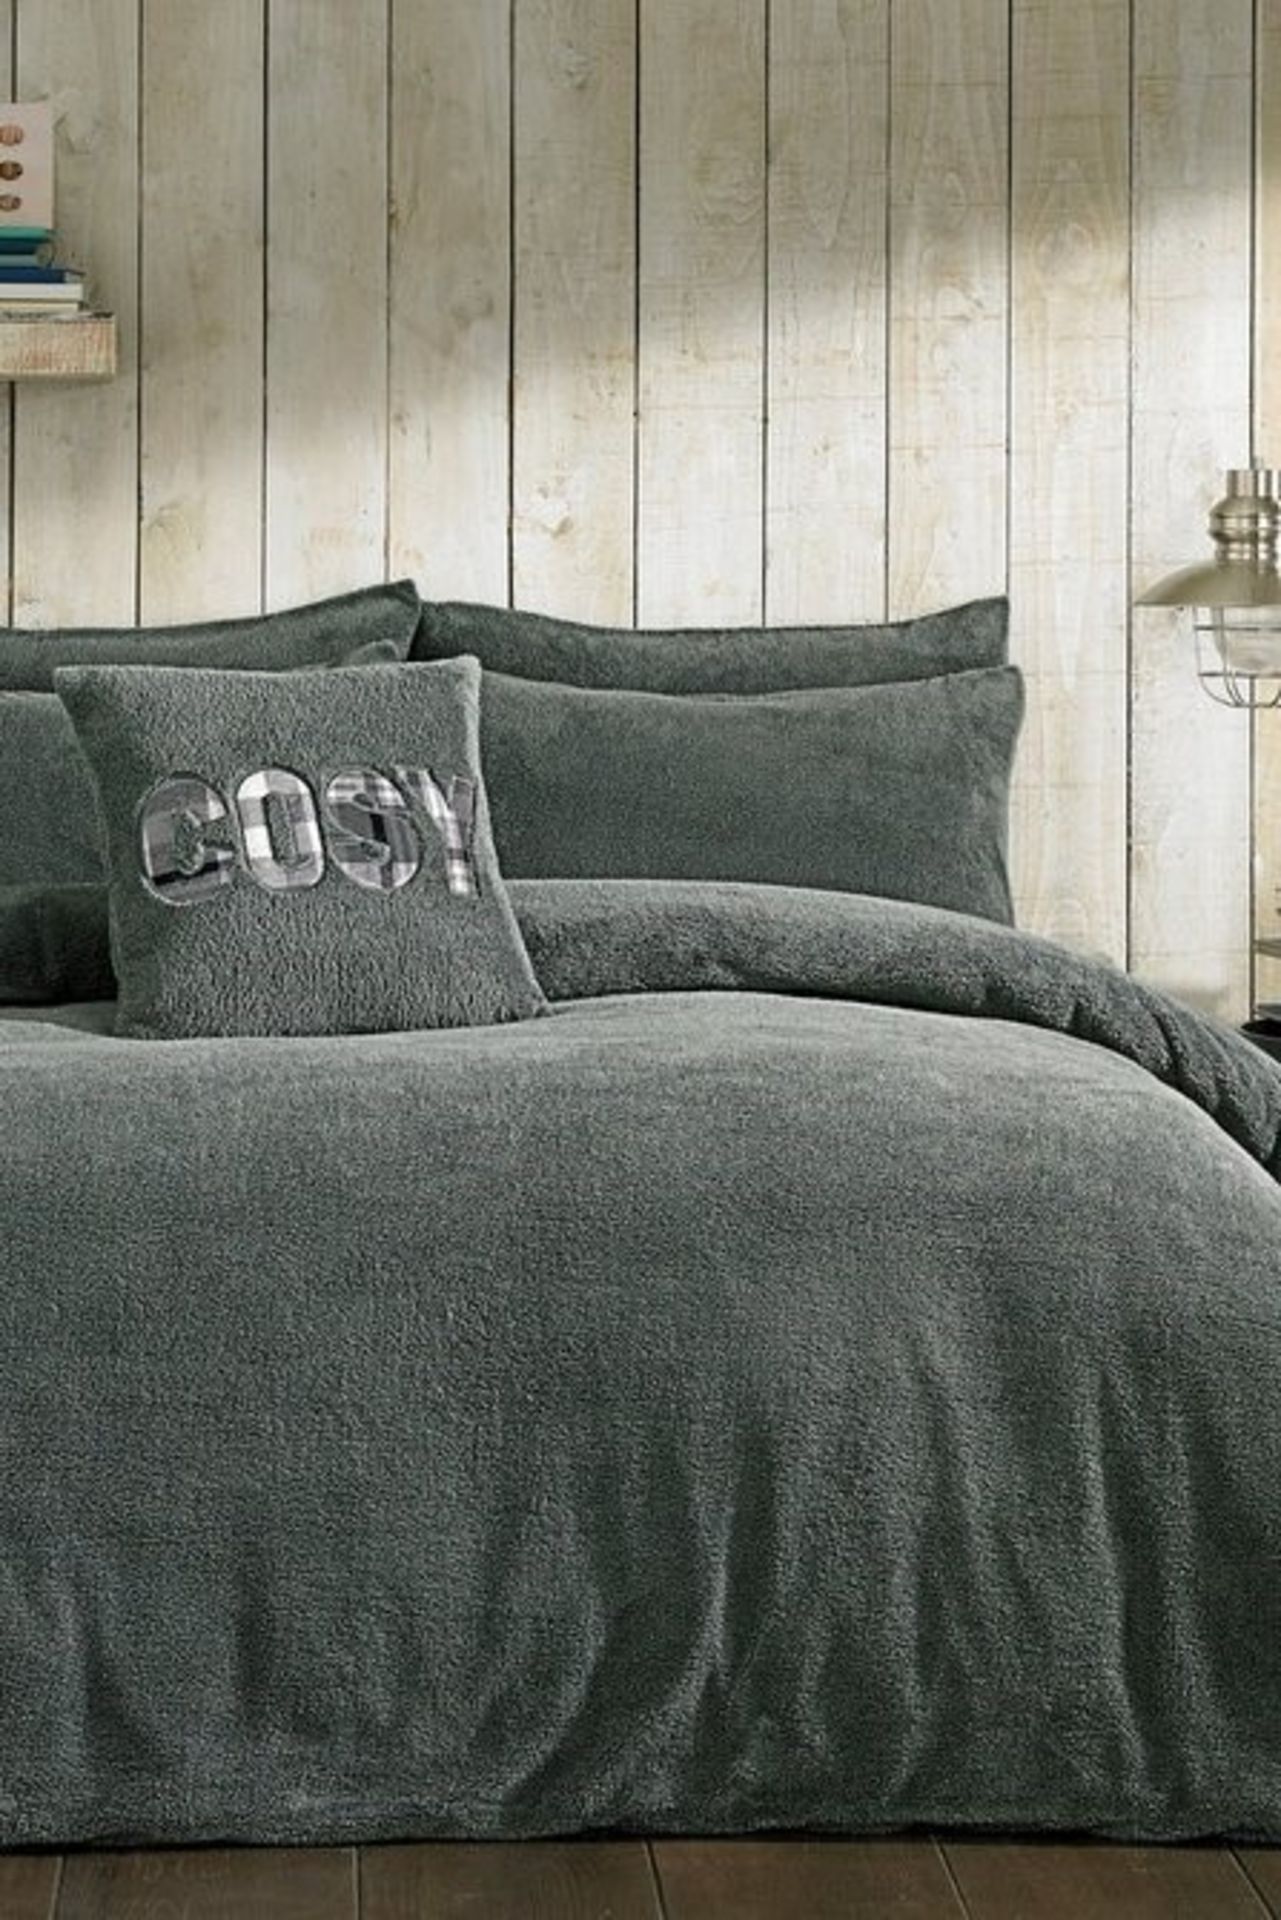 1 AS NEW BAGGED COSY TEDDY FITTED SHEET IN CHARCOAL GREY / SIZE: SINGLE / RRP £26.99 (PUBLIC VIEWING